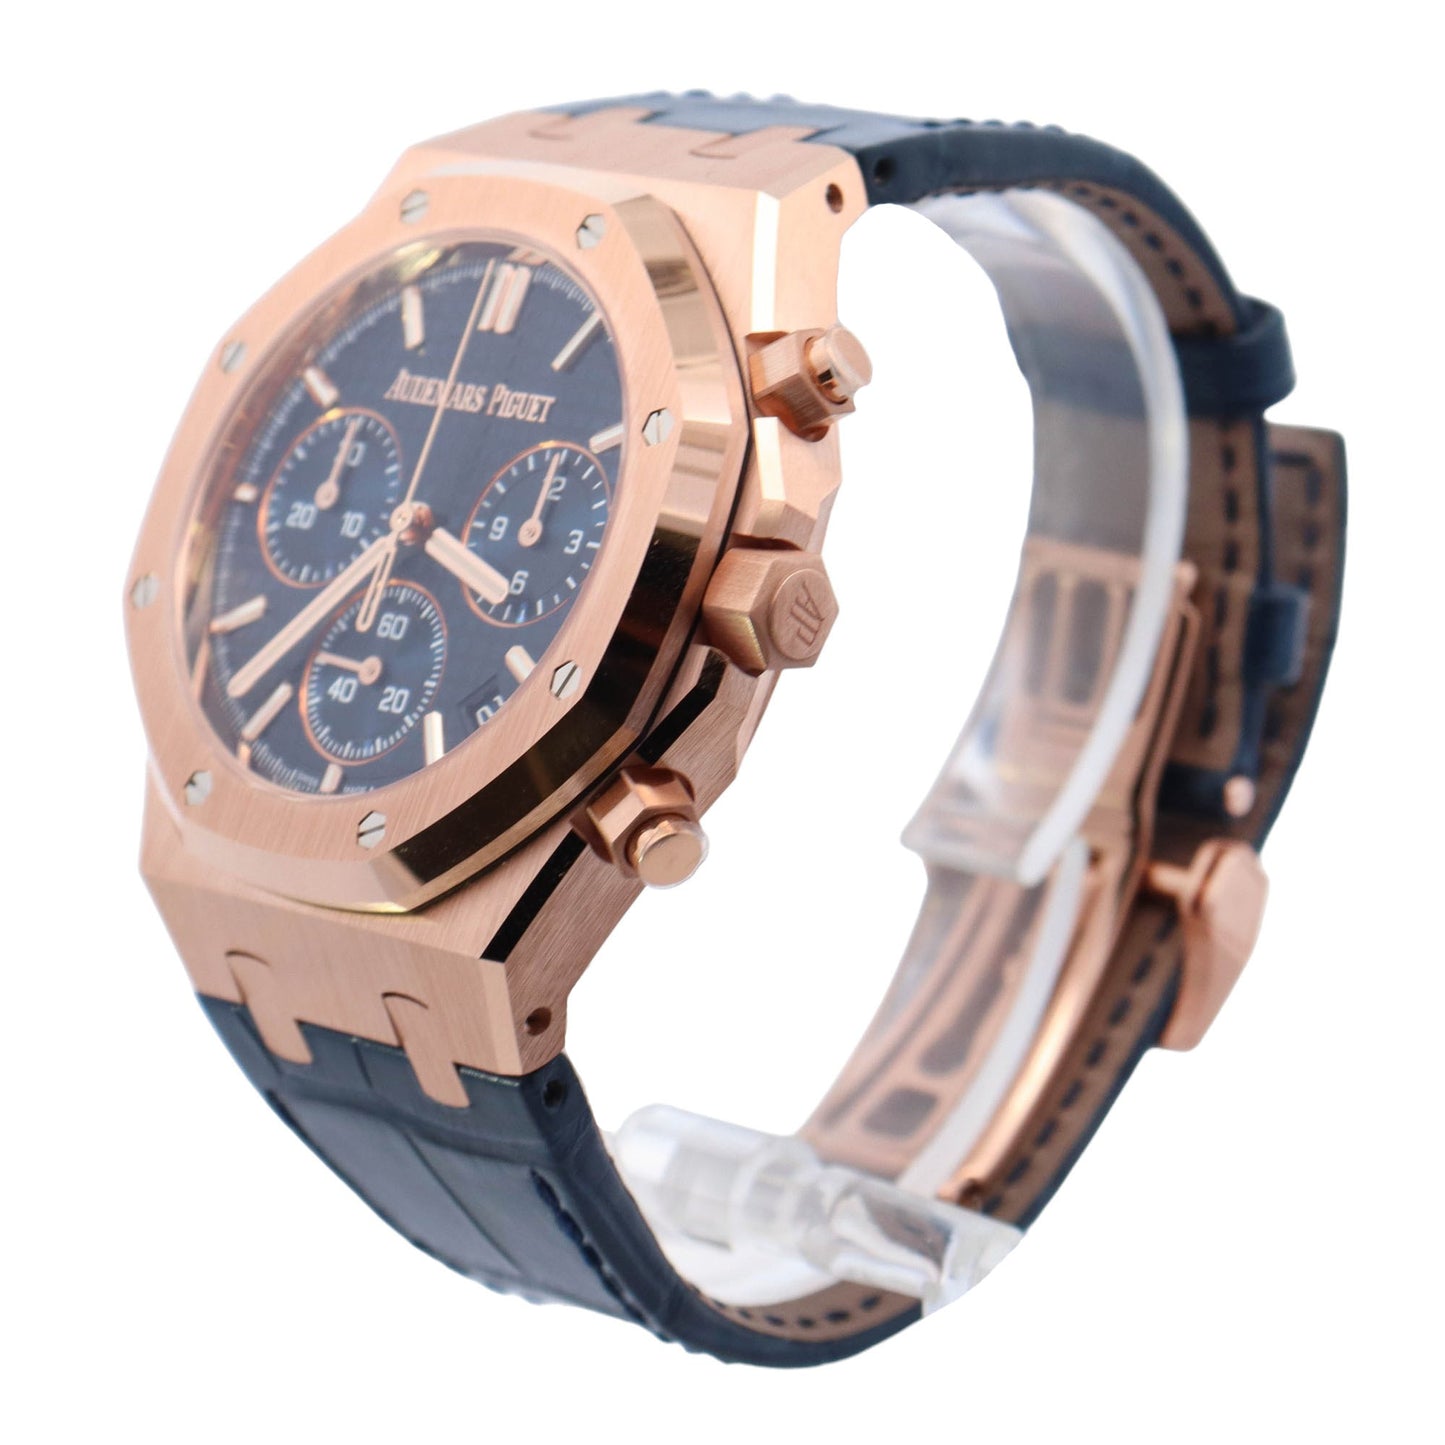 Audemars Piguet Royal Oak 41mm Rose Gold Blue Chronograph Dial Watch Reference# 26240OR.OO.D315CR.02